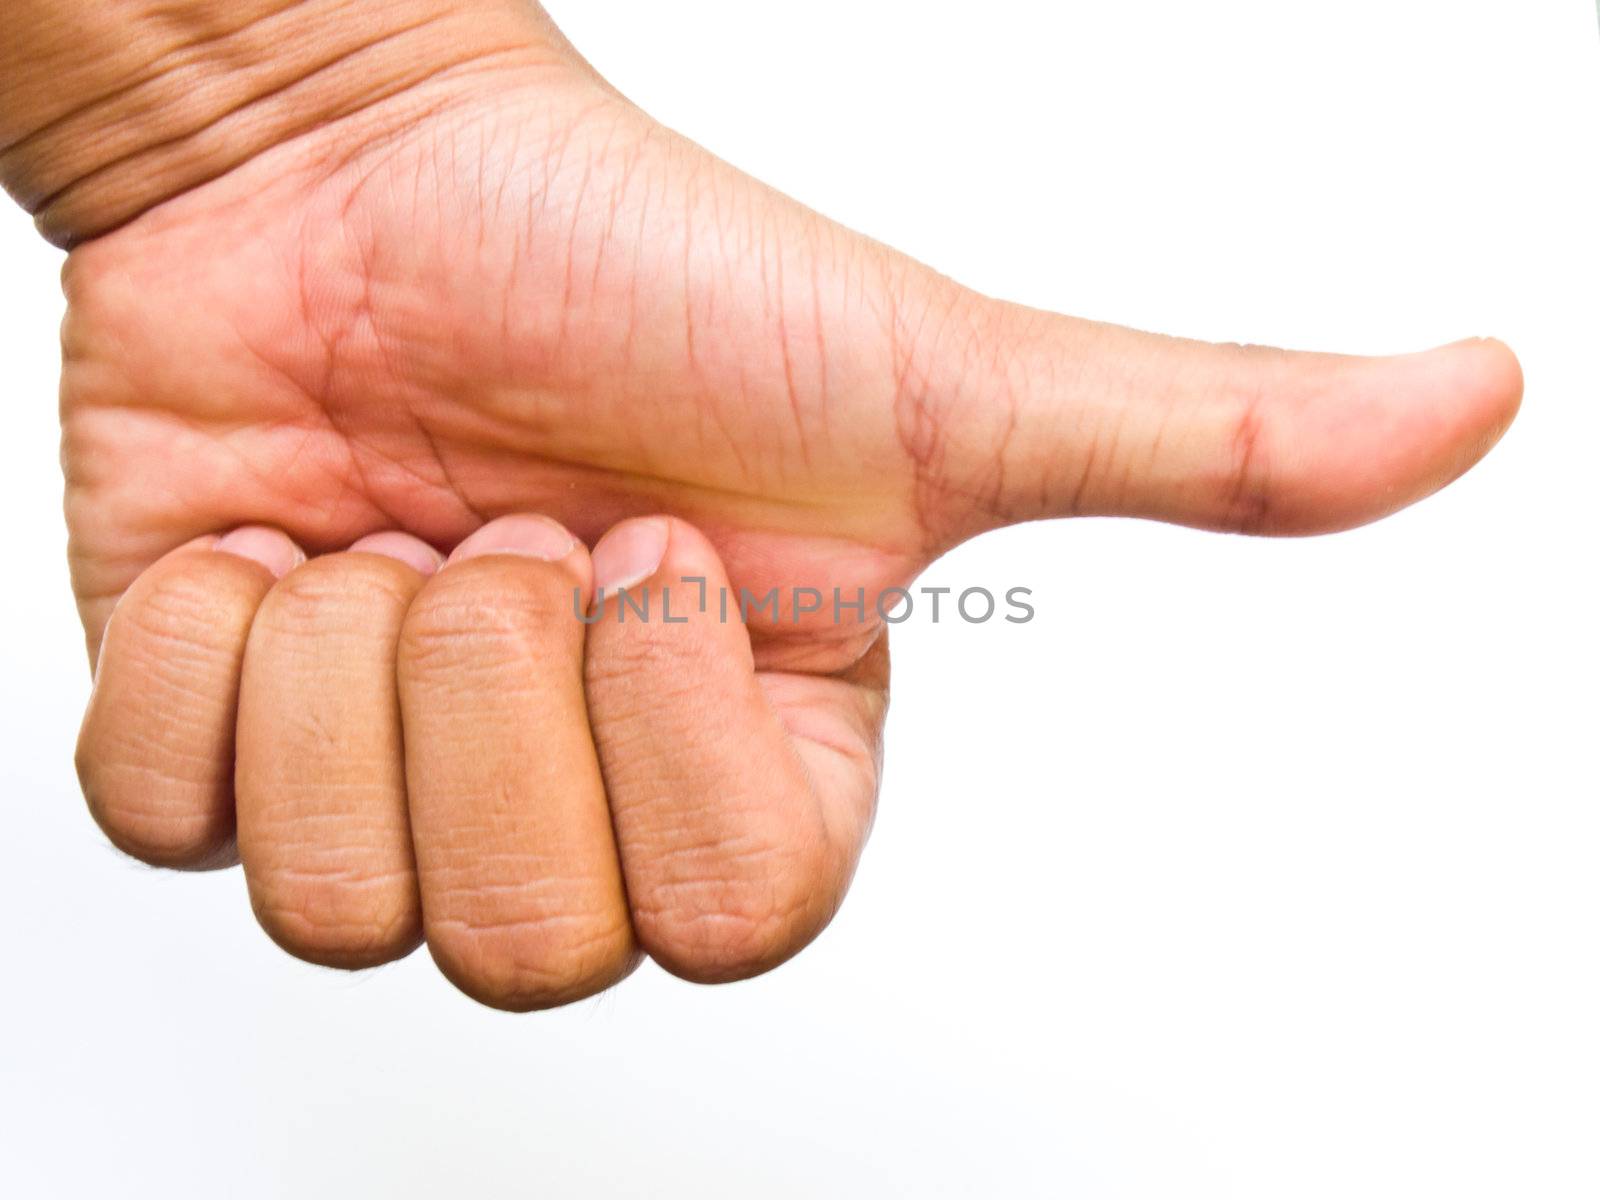 Thump Up Gesture (Expressing Satisfaction, Approved, Success) isolated on white background